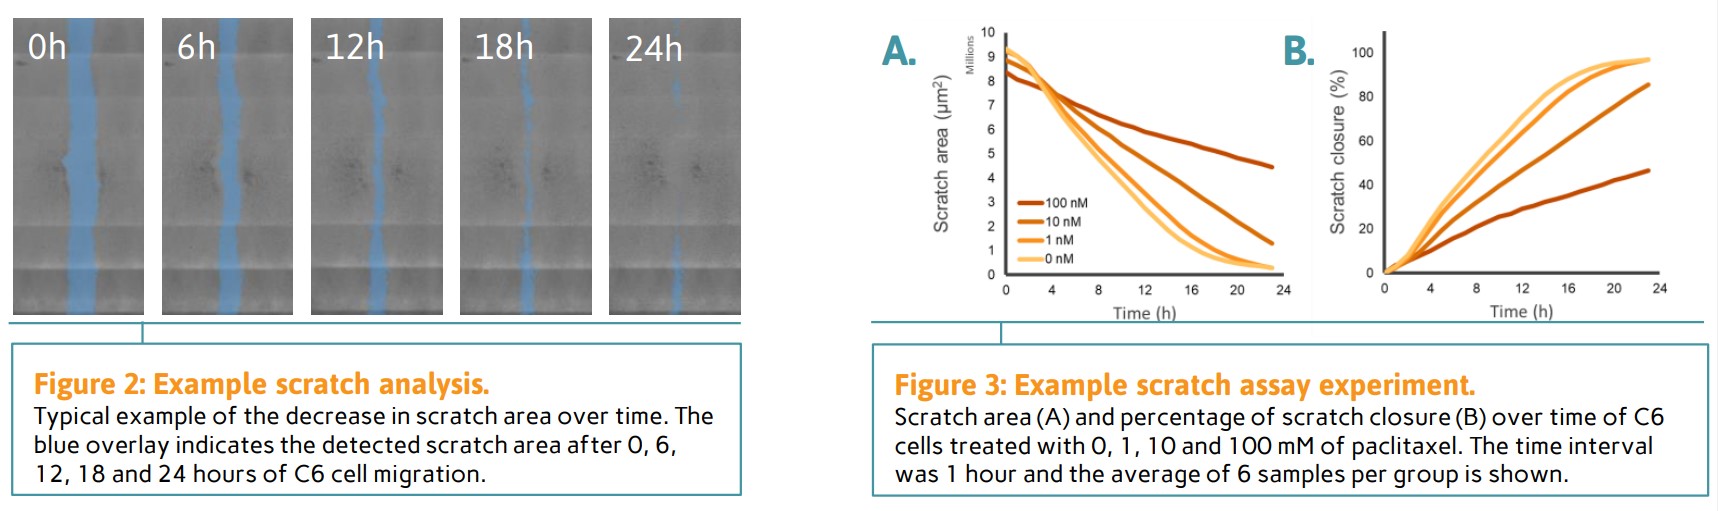 Figure 2 & 3: : Example scratch analysis and example scratch assay experiment